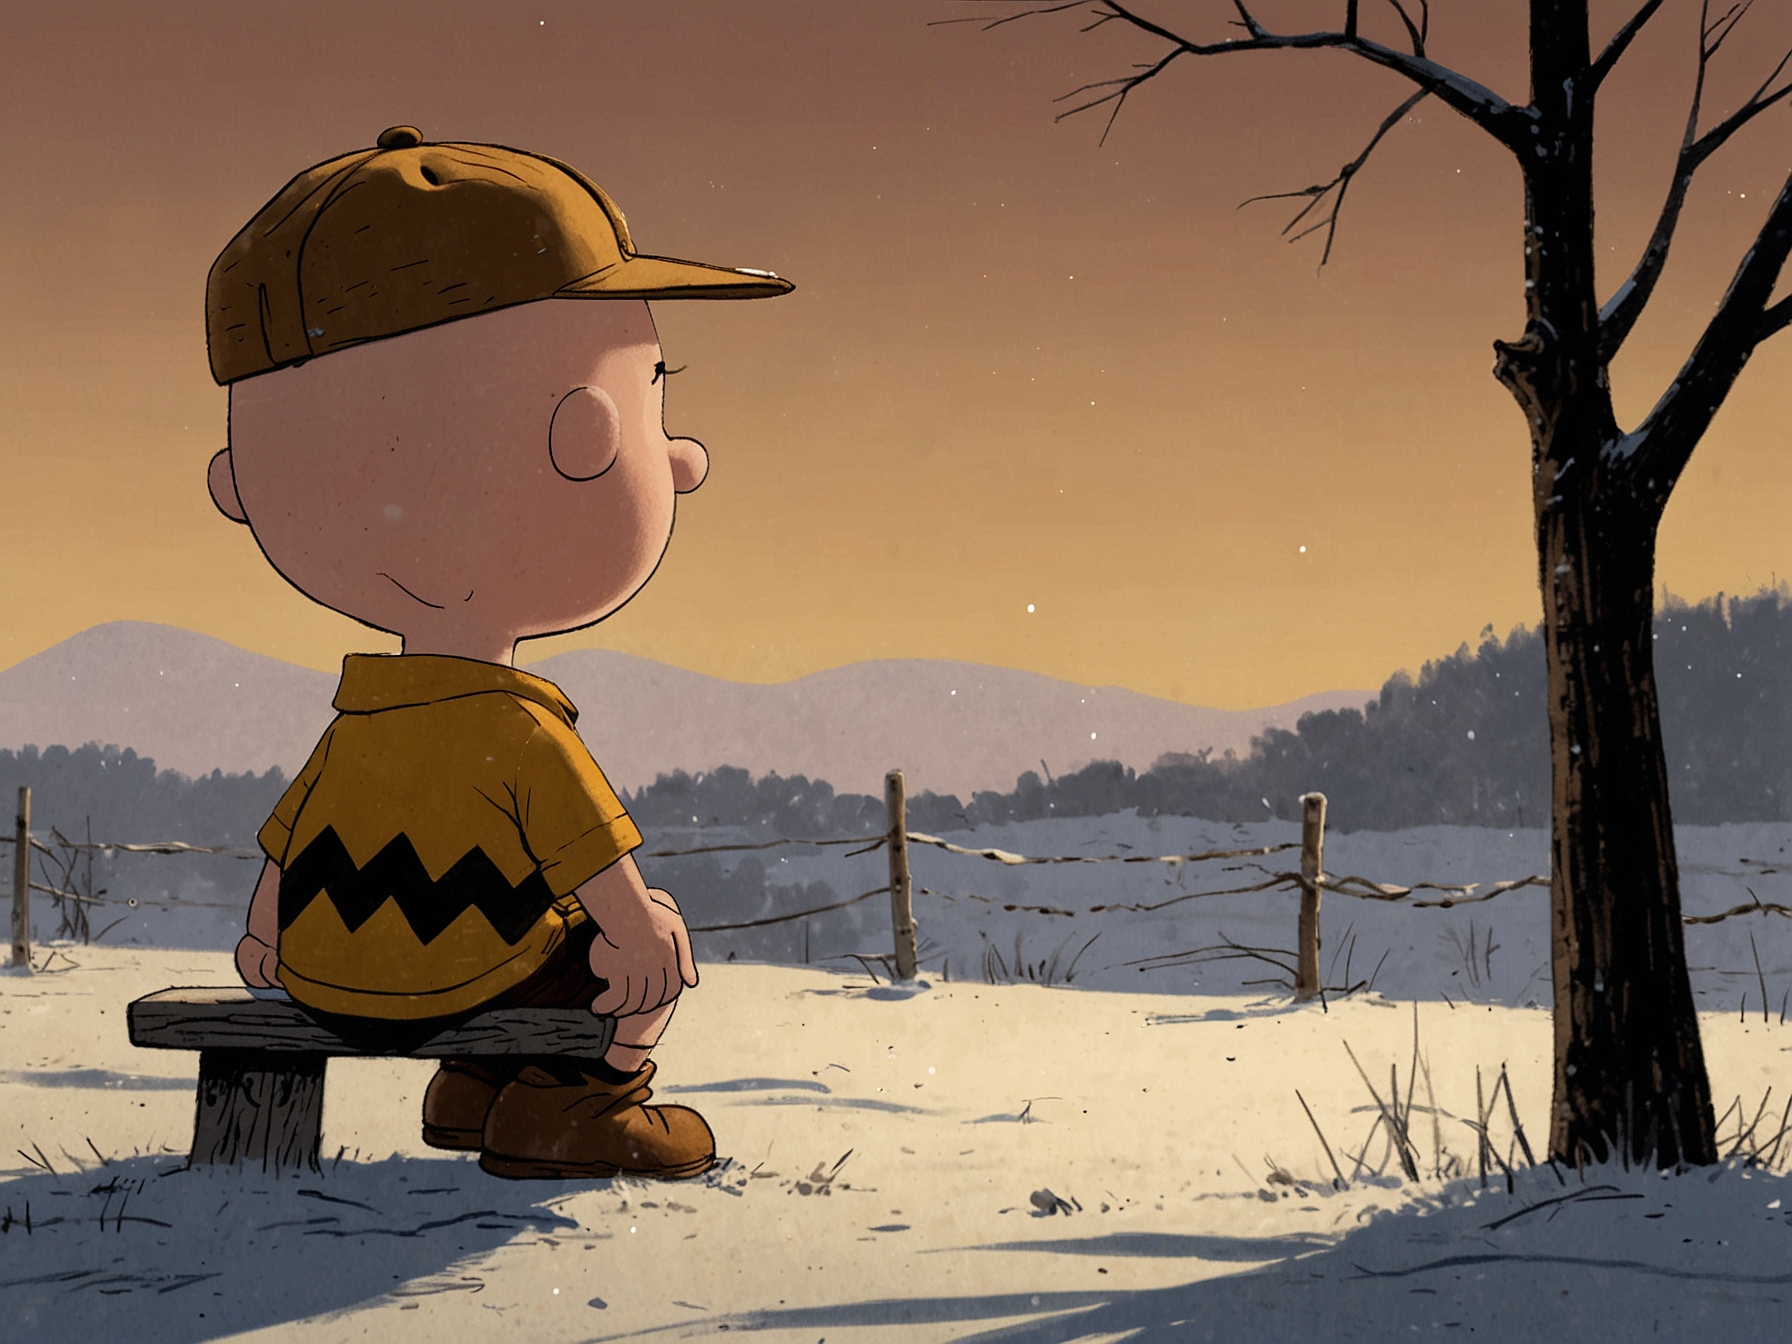 A screenshot of Charlie Brown looking thoughtful, perhaps pondering his New Year's resolution. The image highlights the character's storyline of finding confidence in the special.